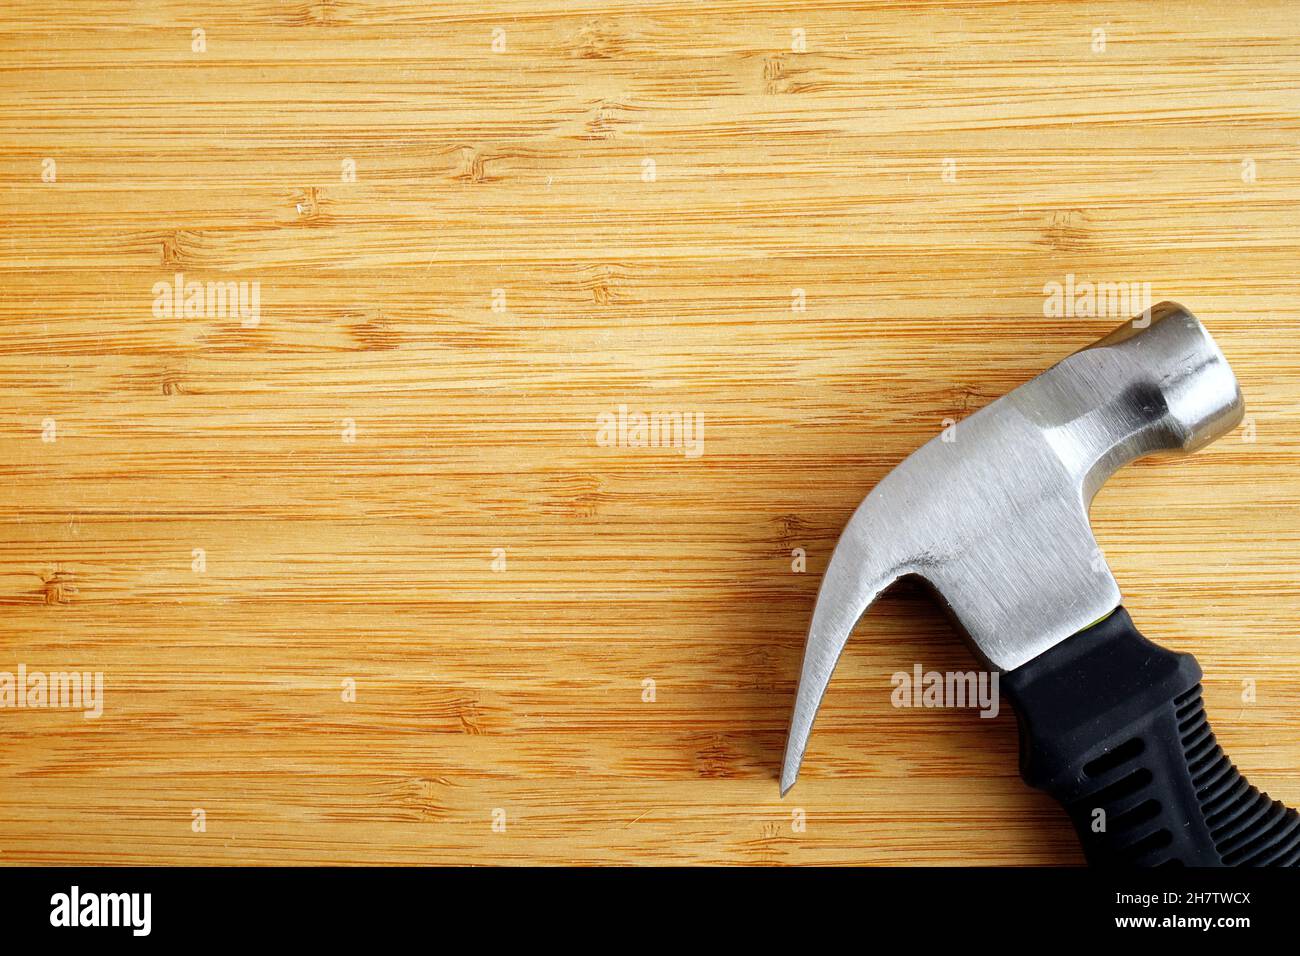 Stubby claw hammer on wooden background with copy space Stock Photo